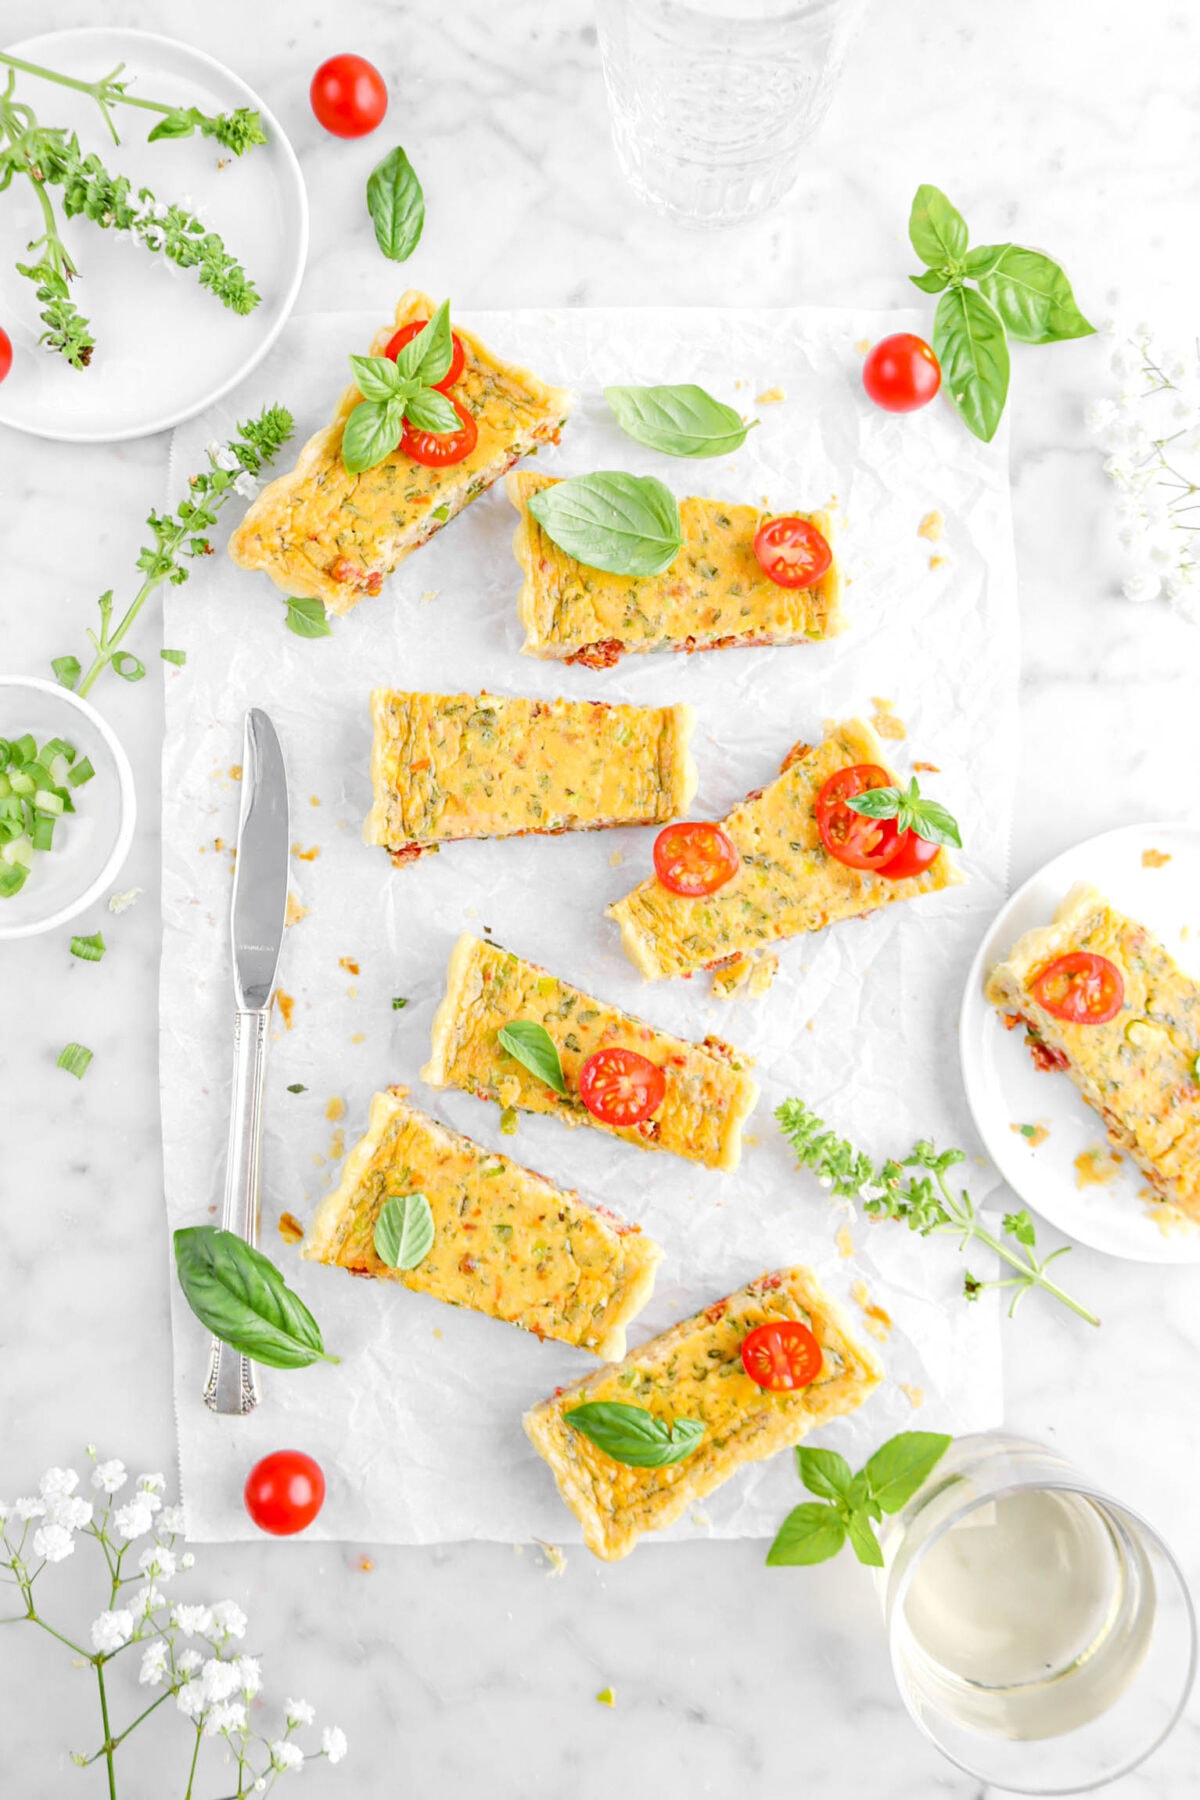 overhead shot of tomato tart slices on parchment paper with basil sprigs and tomatoes around, glass of white wine, and flowers beside